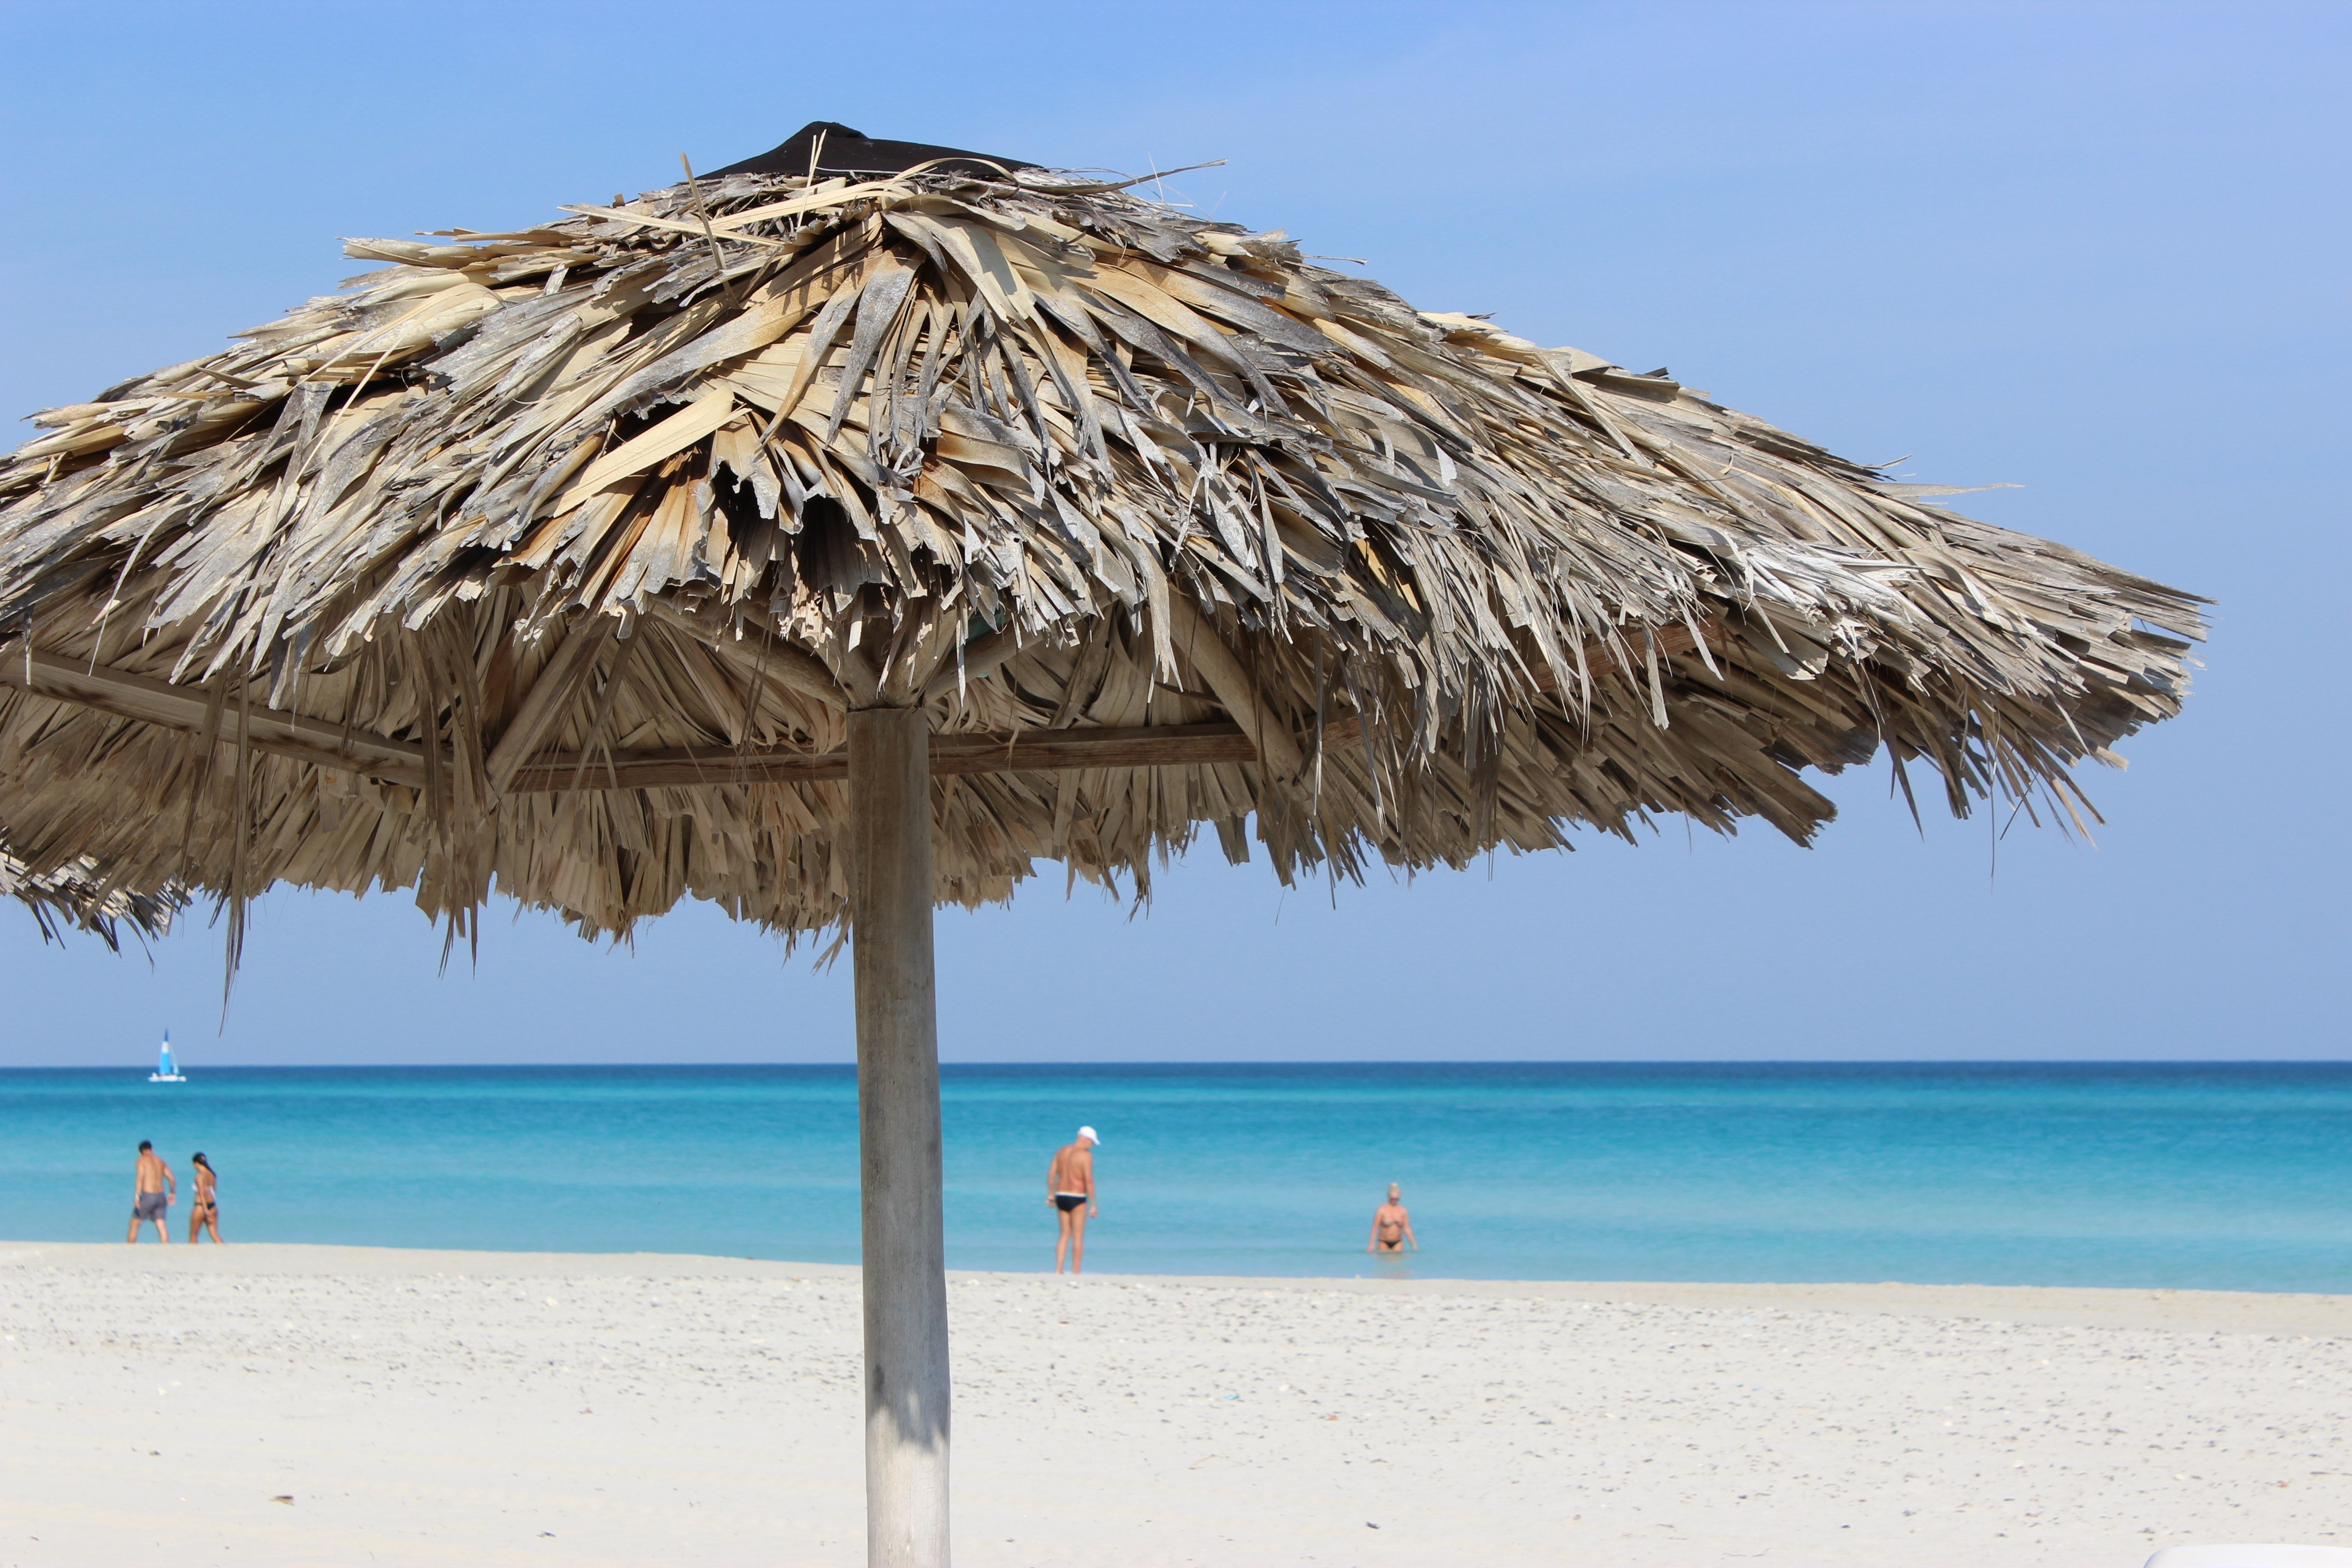 A glimpse of Varadero Beach, the most famous beach in Cuba